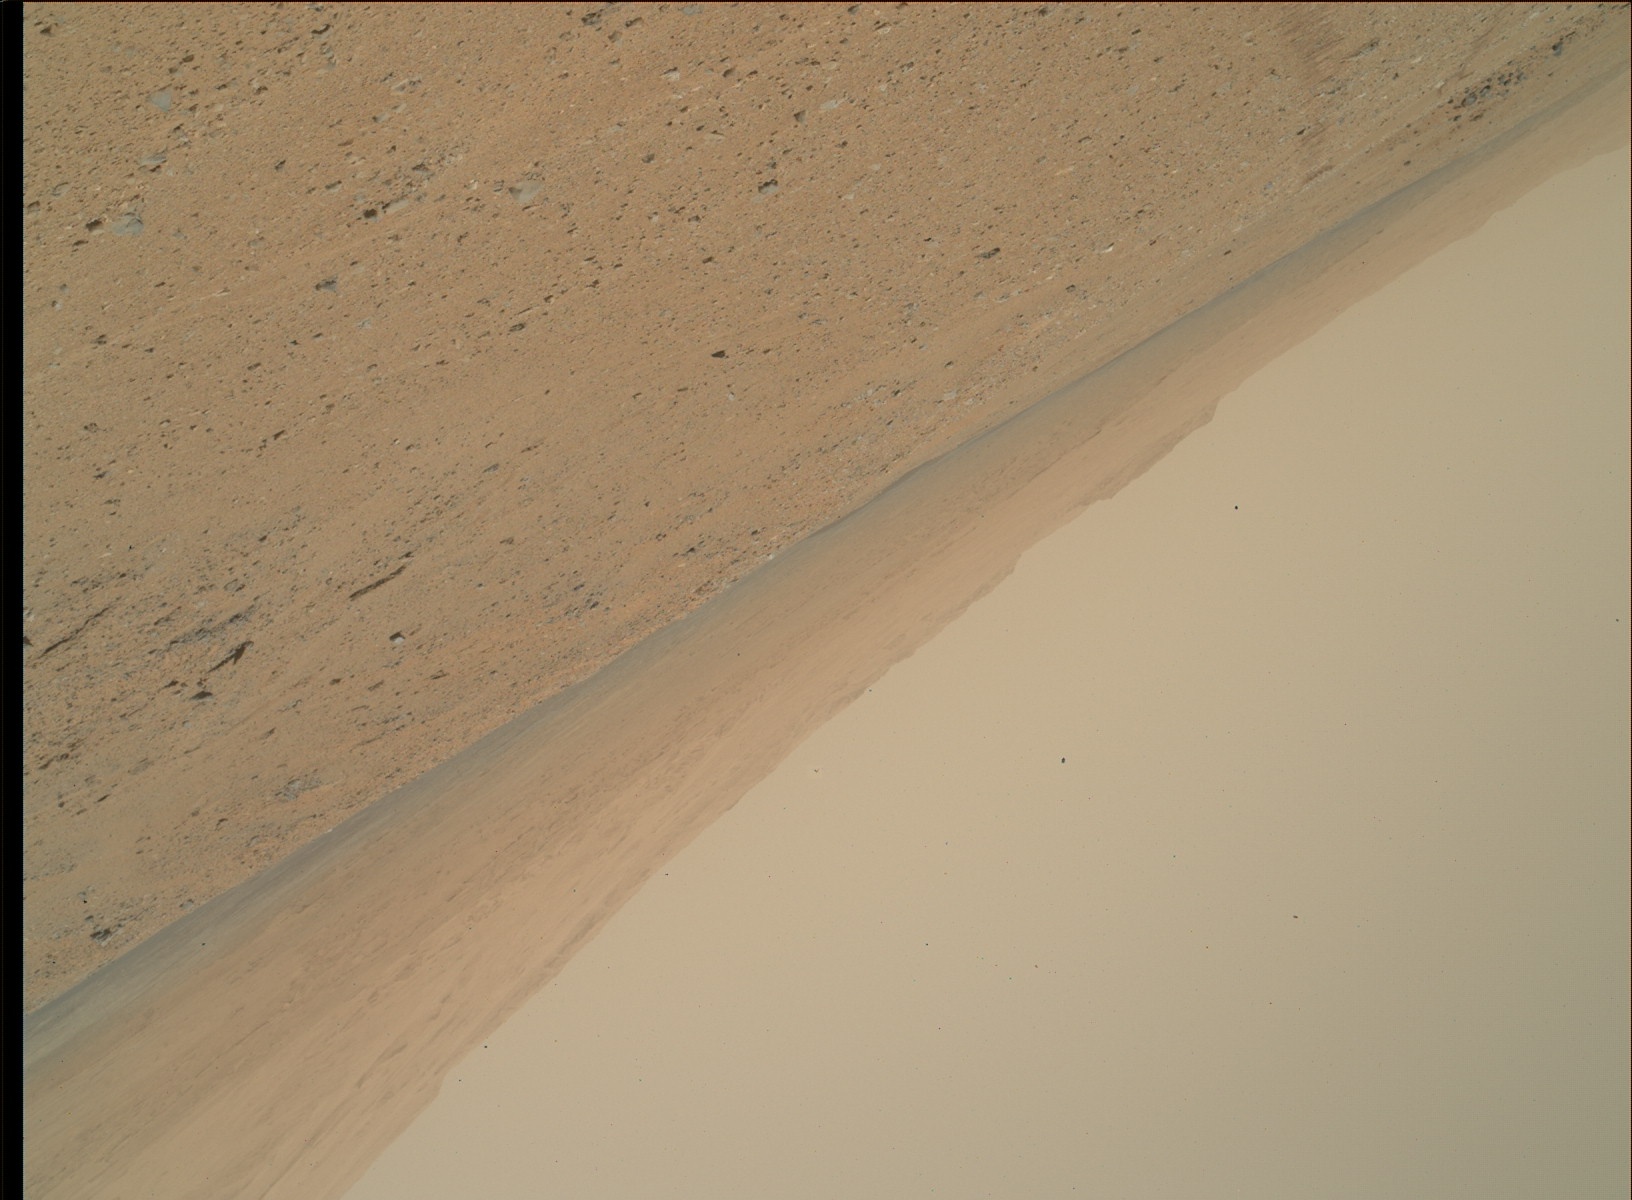 Nasa's Mars rover Curiosity acquired this image using its Mars Hand Lens Imager (MAHLI) on Sol 356